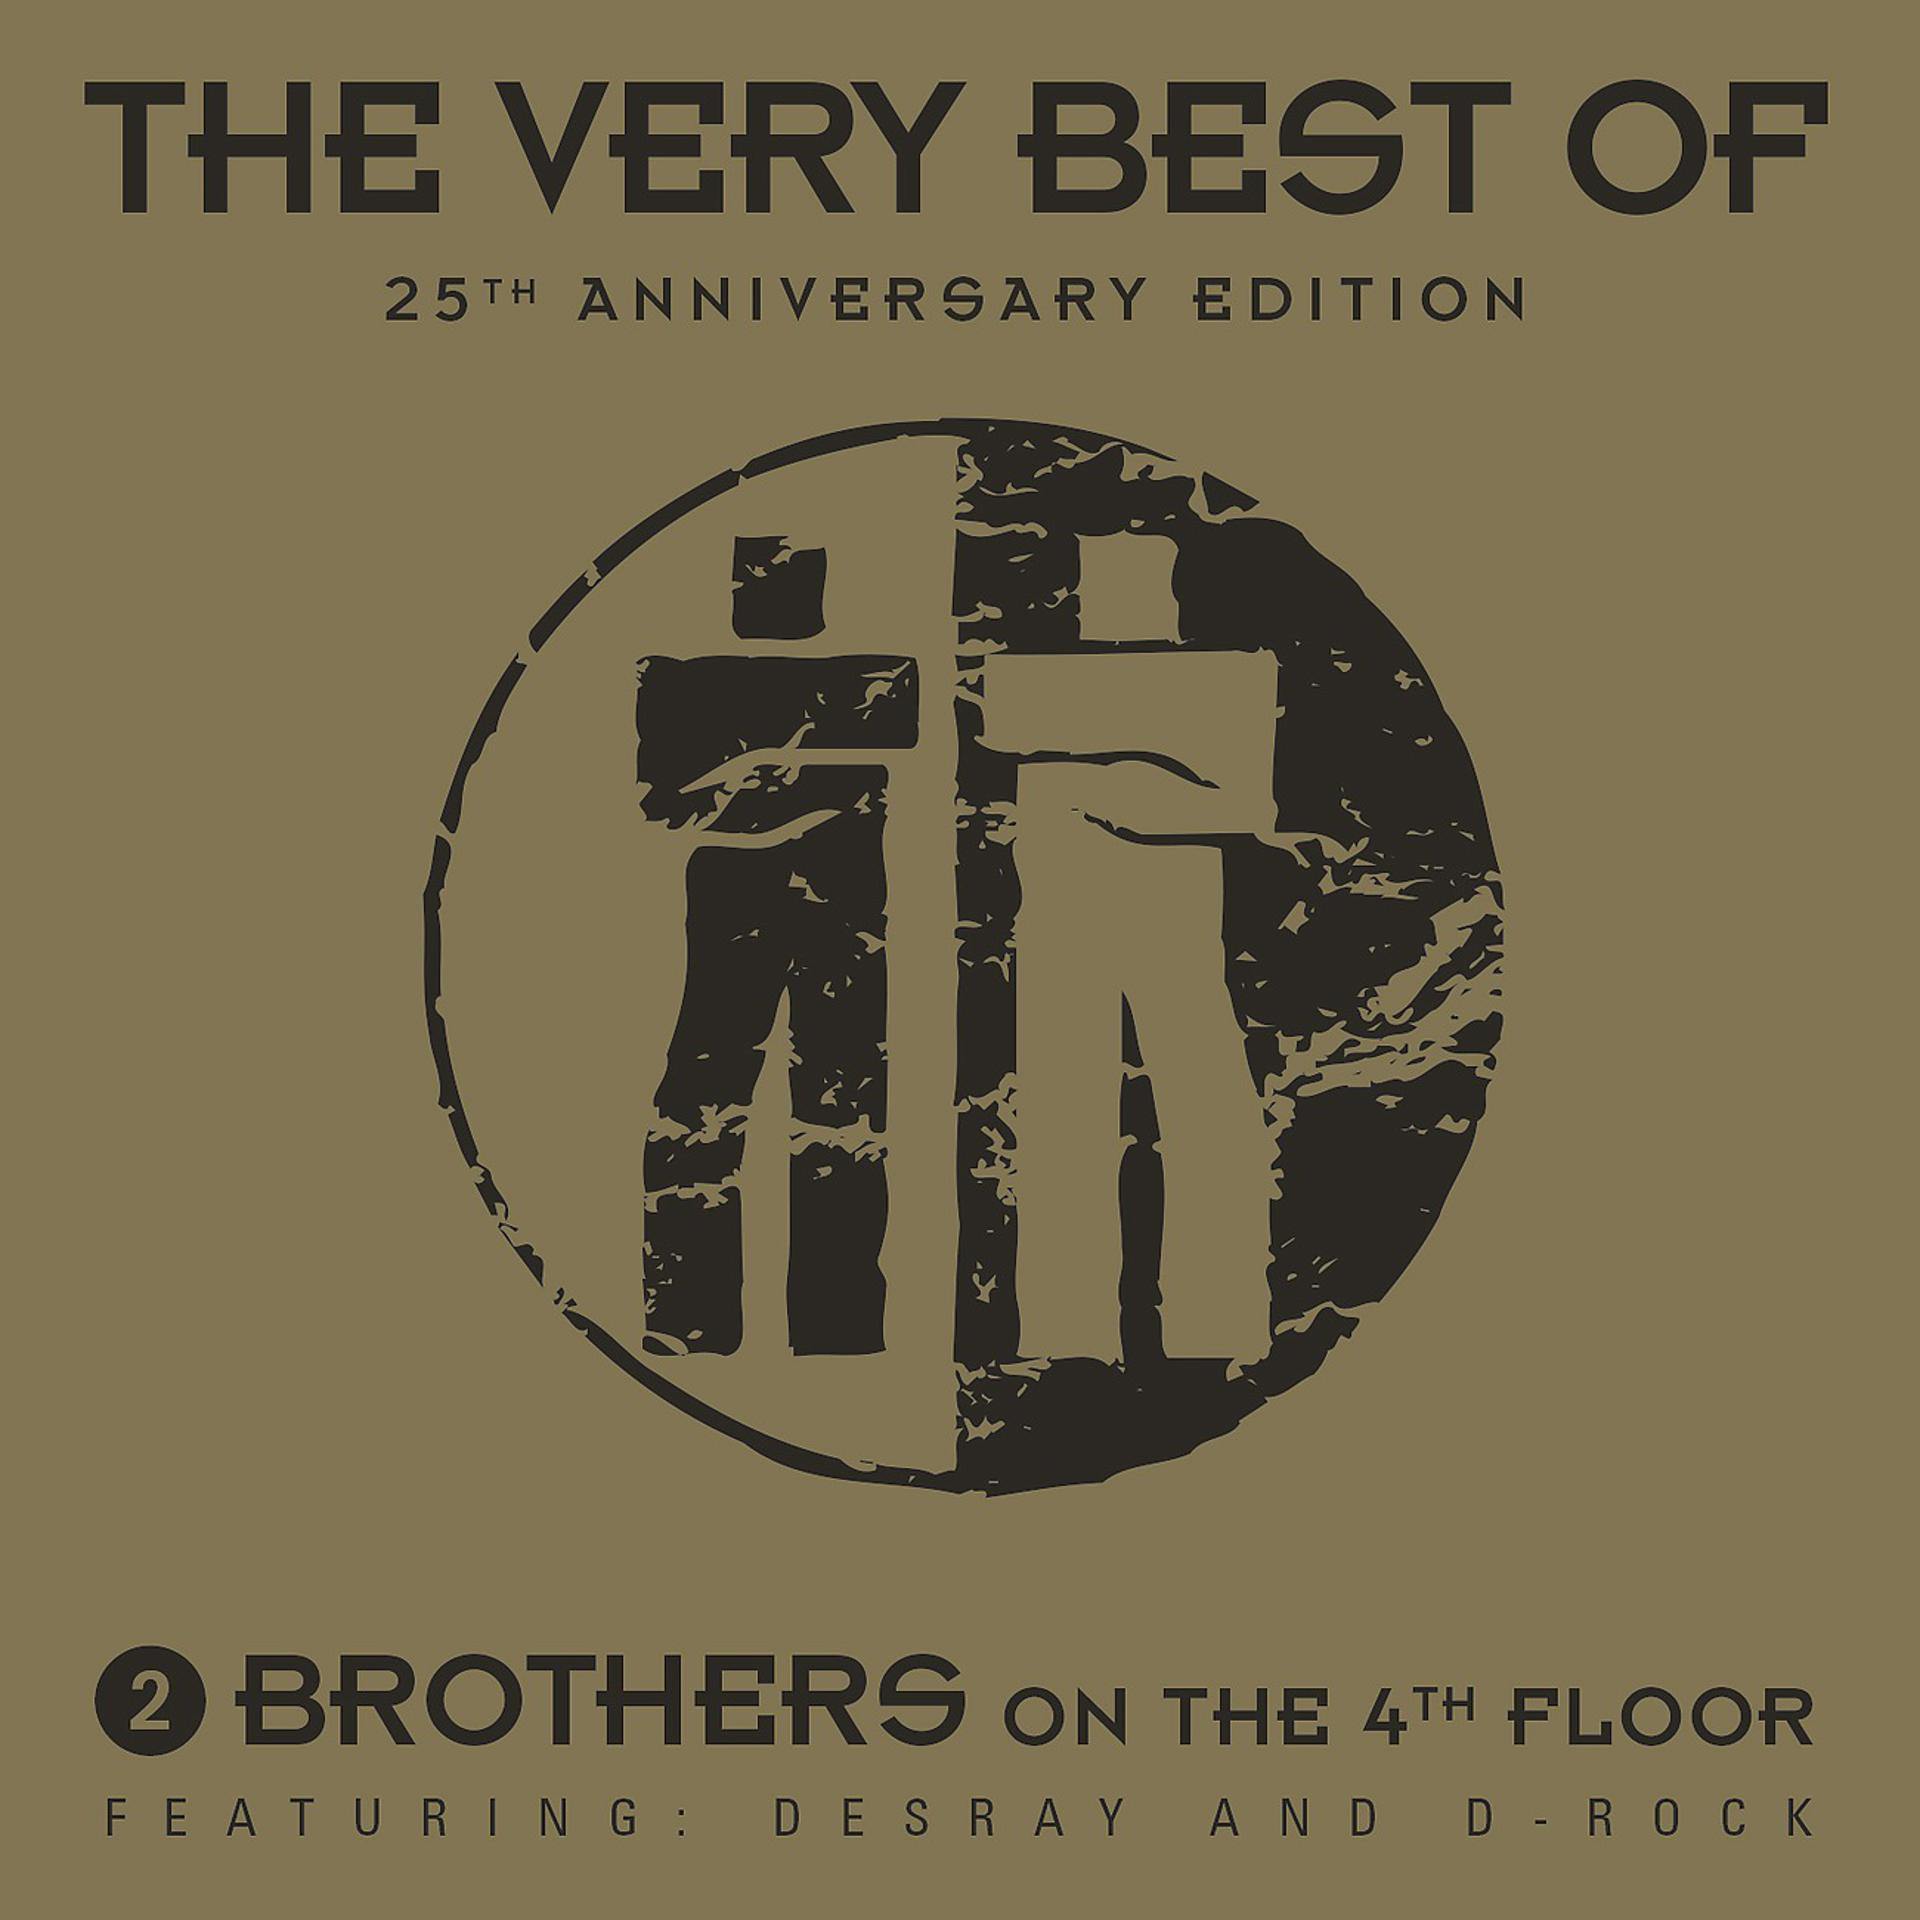 2 brothers come take. 2 Brothers on the 4th Floor - 25th Anniversary the very best of. 2 Brothers on the 4th Floor. The very best of. 30th Anniversary. 2 Brothers on the 4th Floor солистка. 2 Brothers on the 4th Floor - 2 (1996).